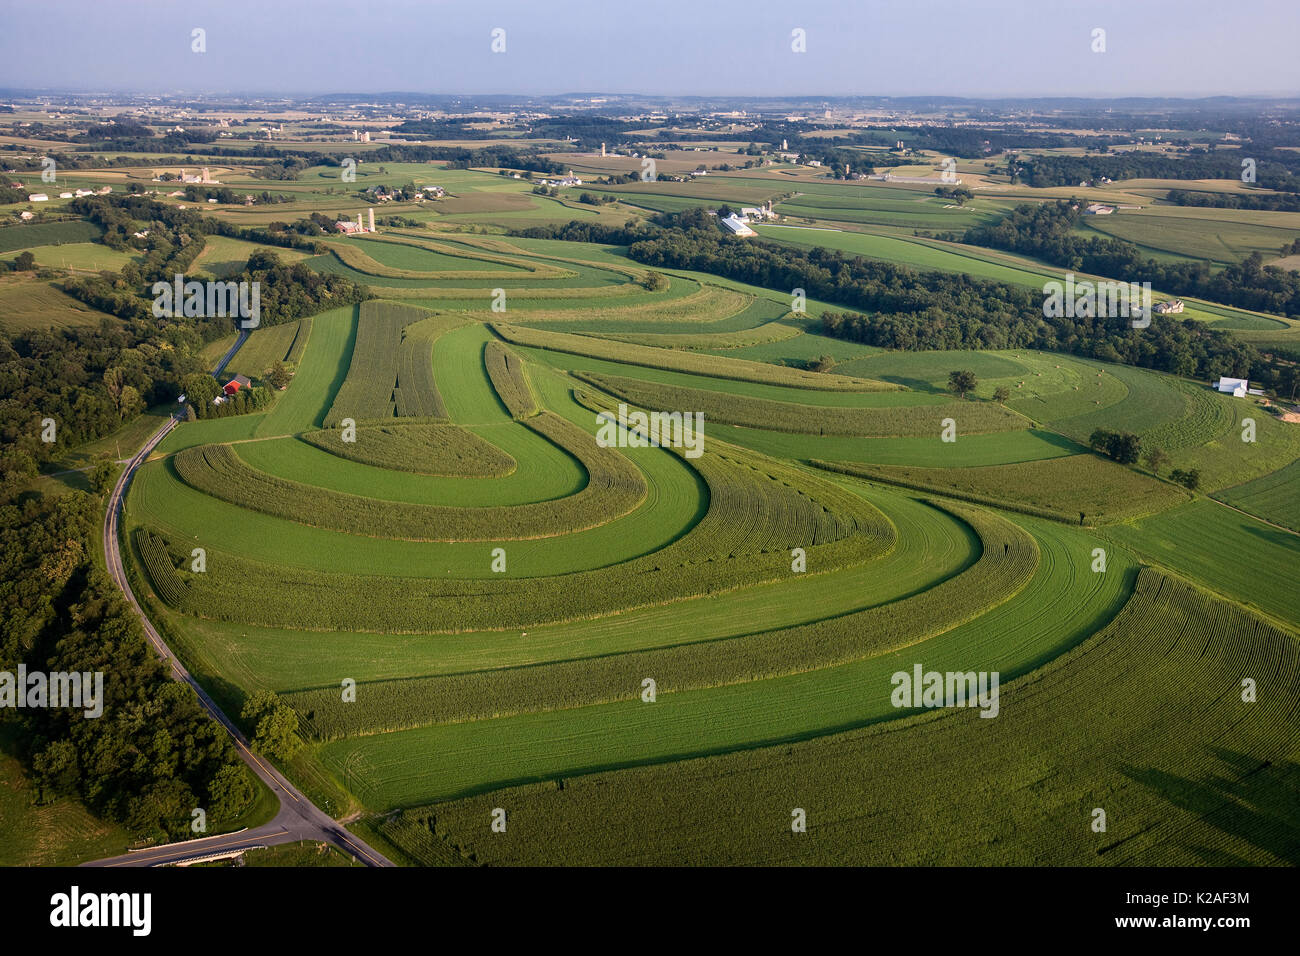 AERIAL VIEW OF CONTOURED CROPS IN FIELD, LANCASTER PENNSYLVANIA Stock Photo